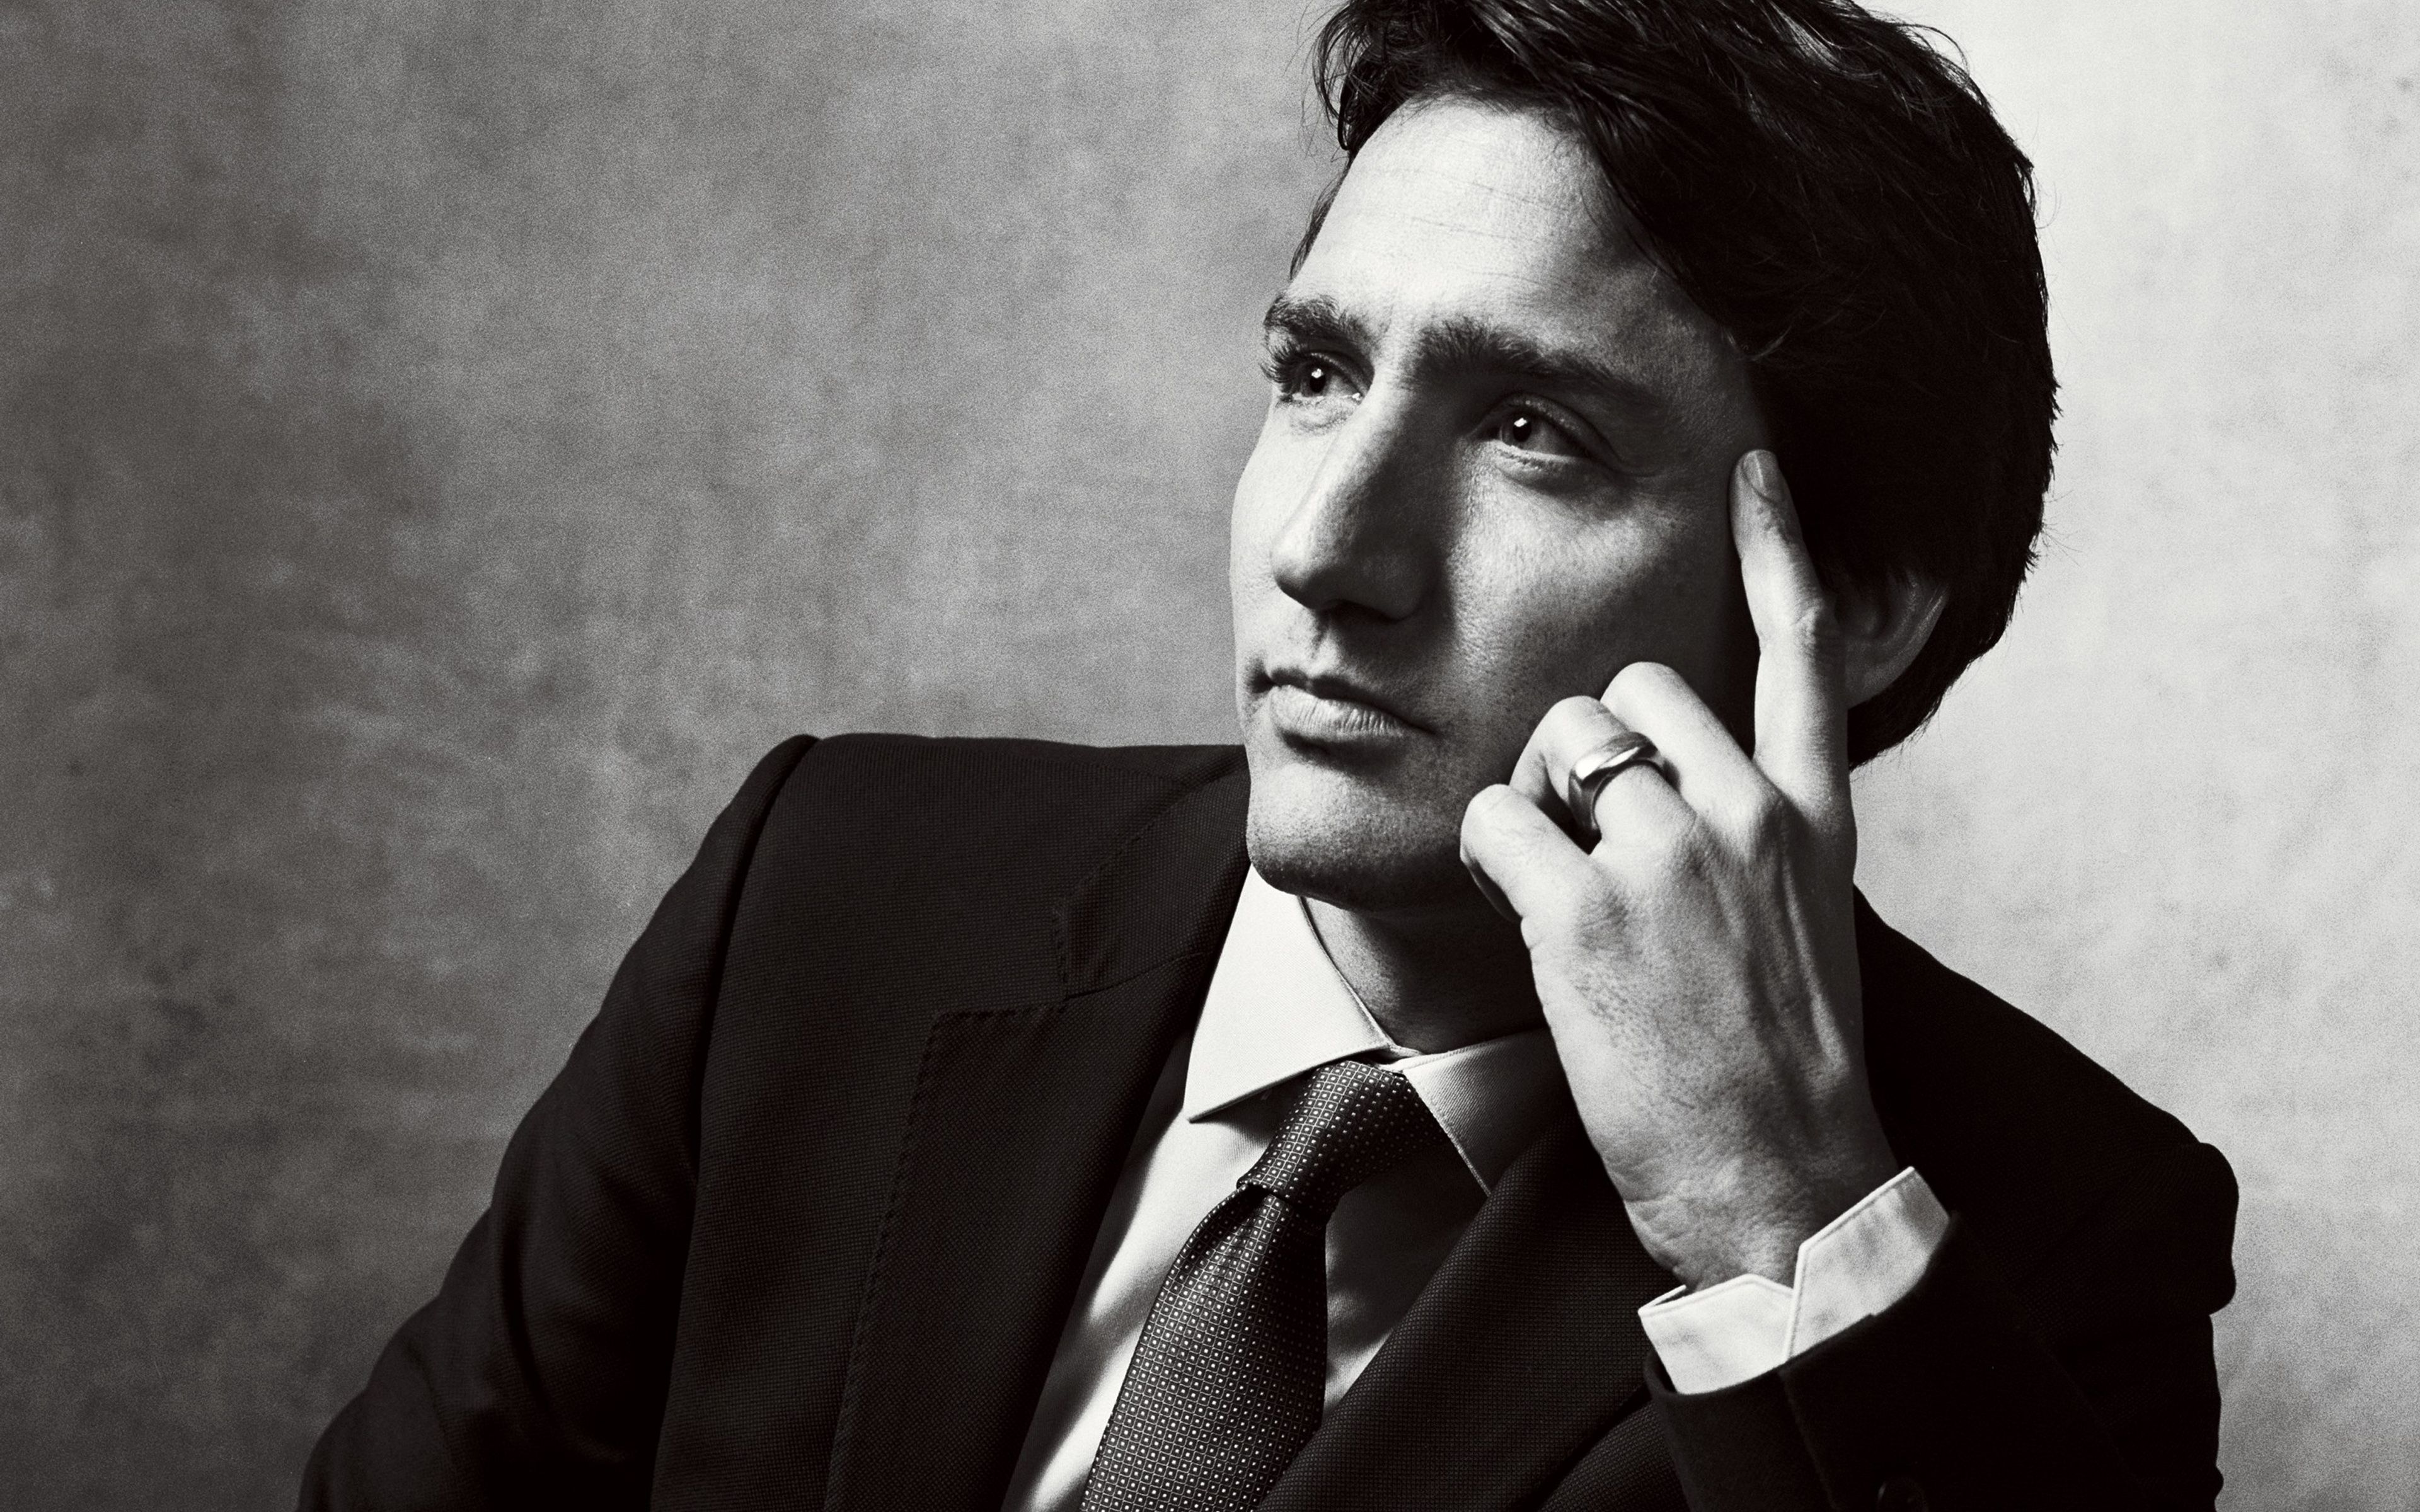 Download wallpaper Justin Trudeau, portrait, 4K, Canadian politician, Prime Minister of Canada for desktop with resolution 3840x2400. High Quality HD picture wallpaper